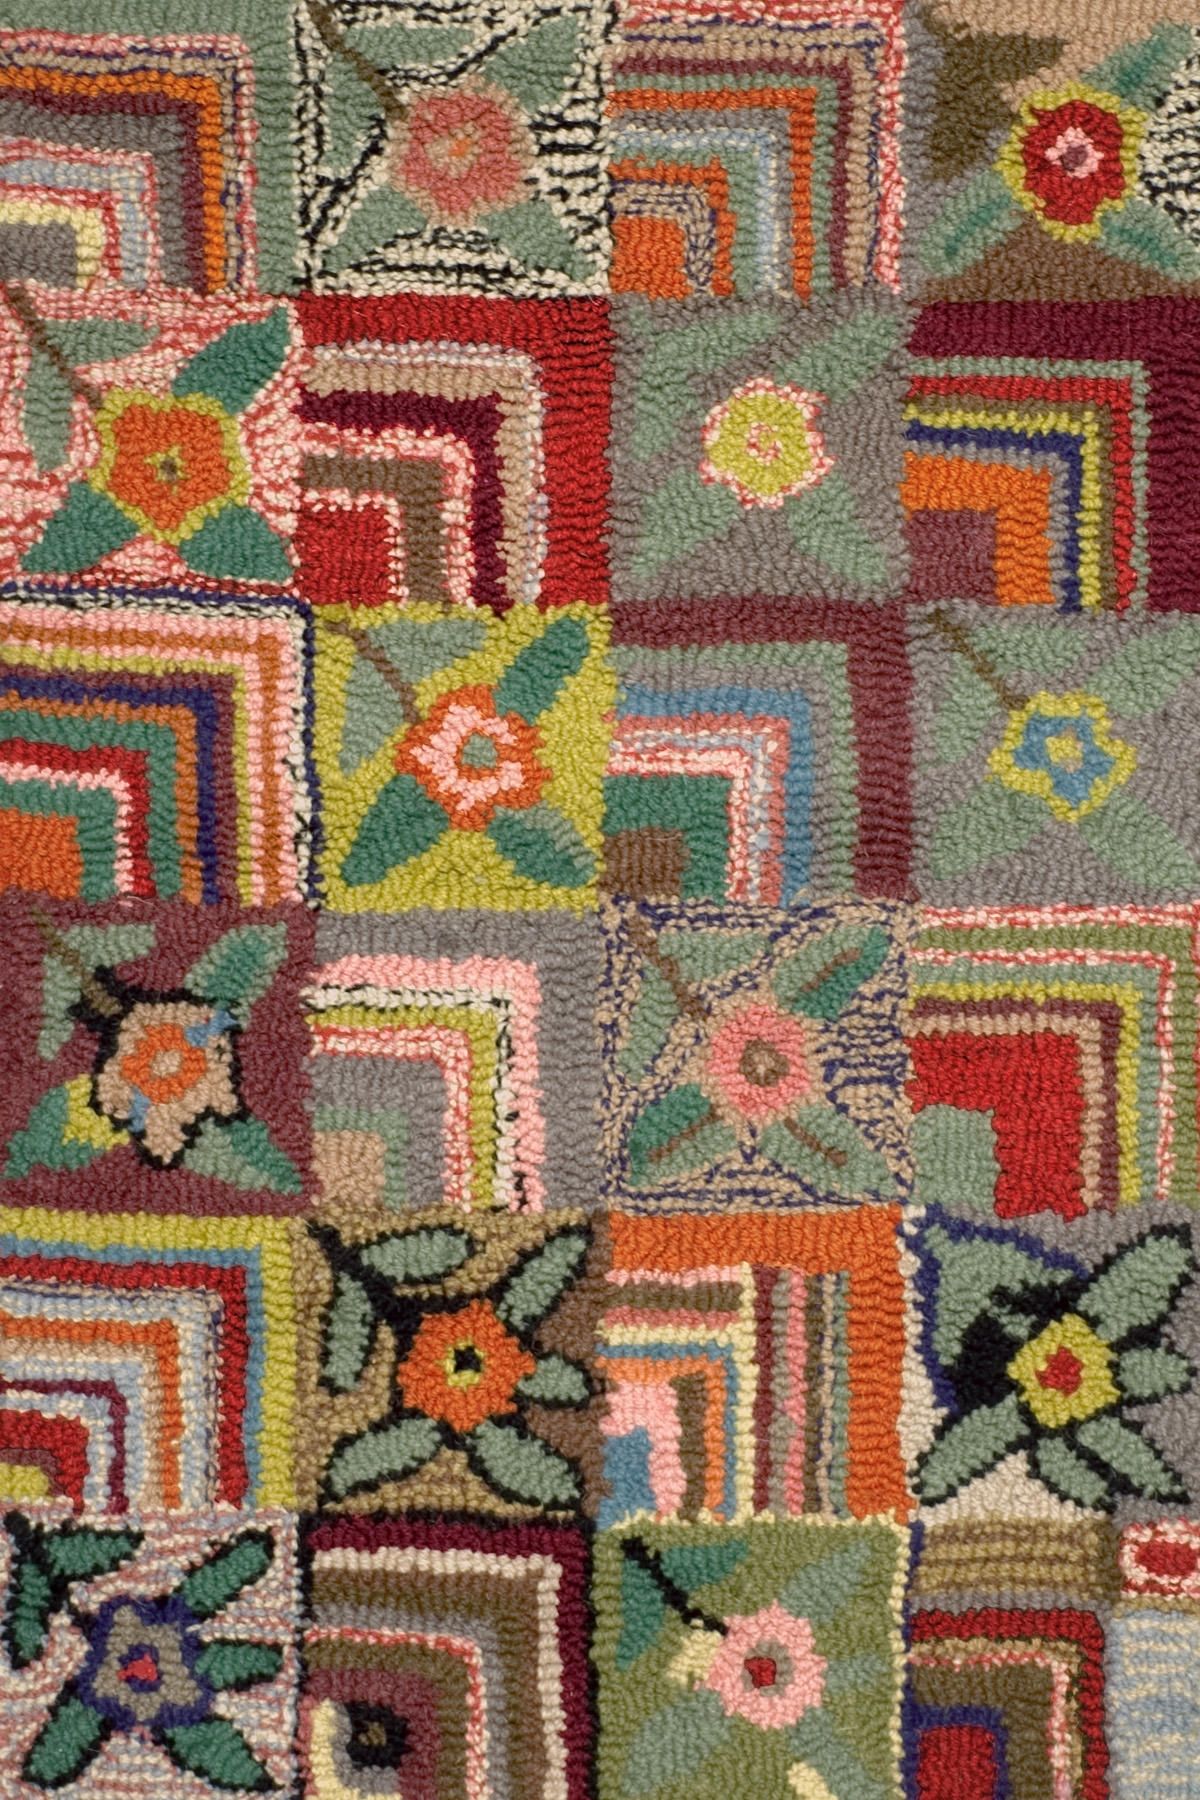 Gypsy Rose Wool Hooked Rug Wool Yarn Cotton Canvas And Home With Wool Hooked Area Rugs (View 5 of 9)